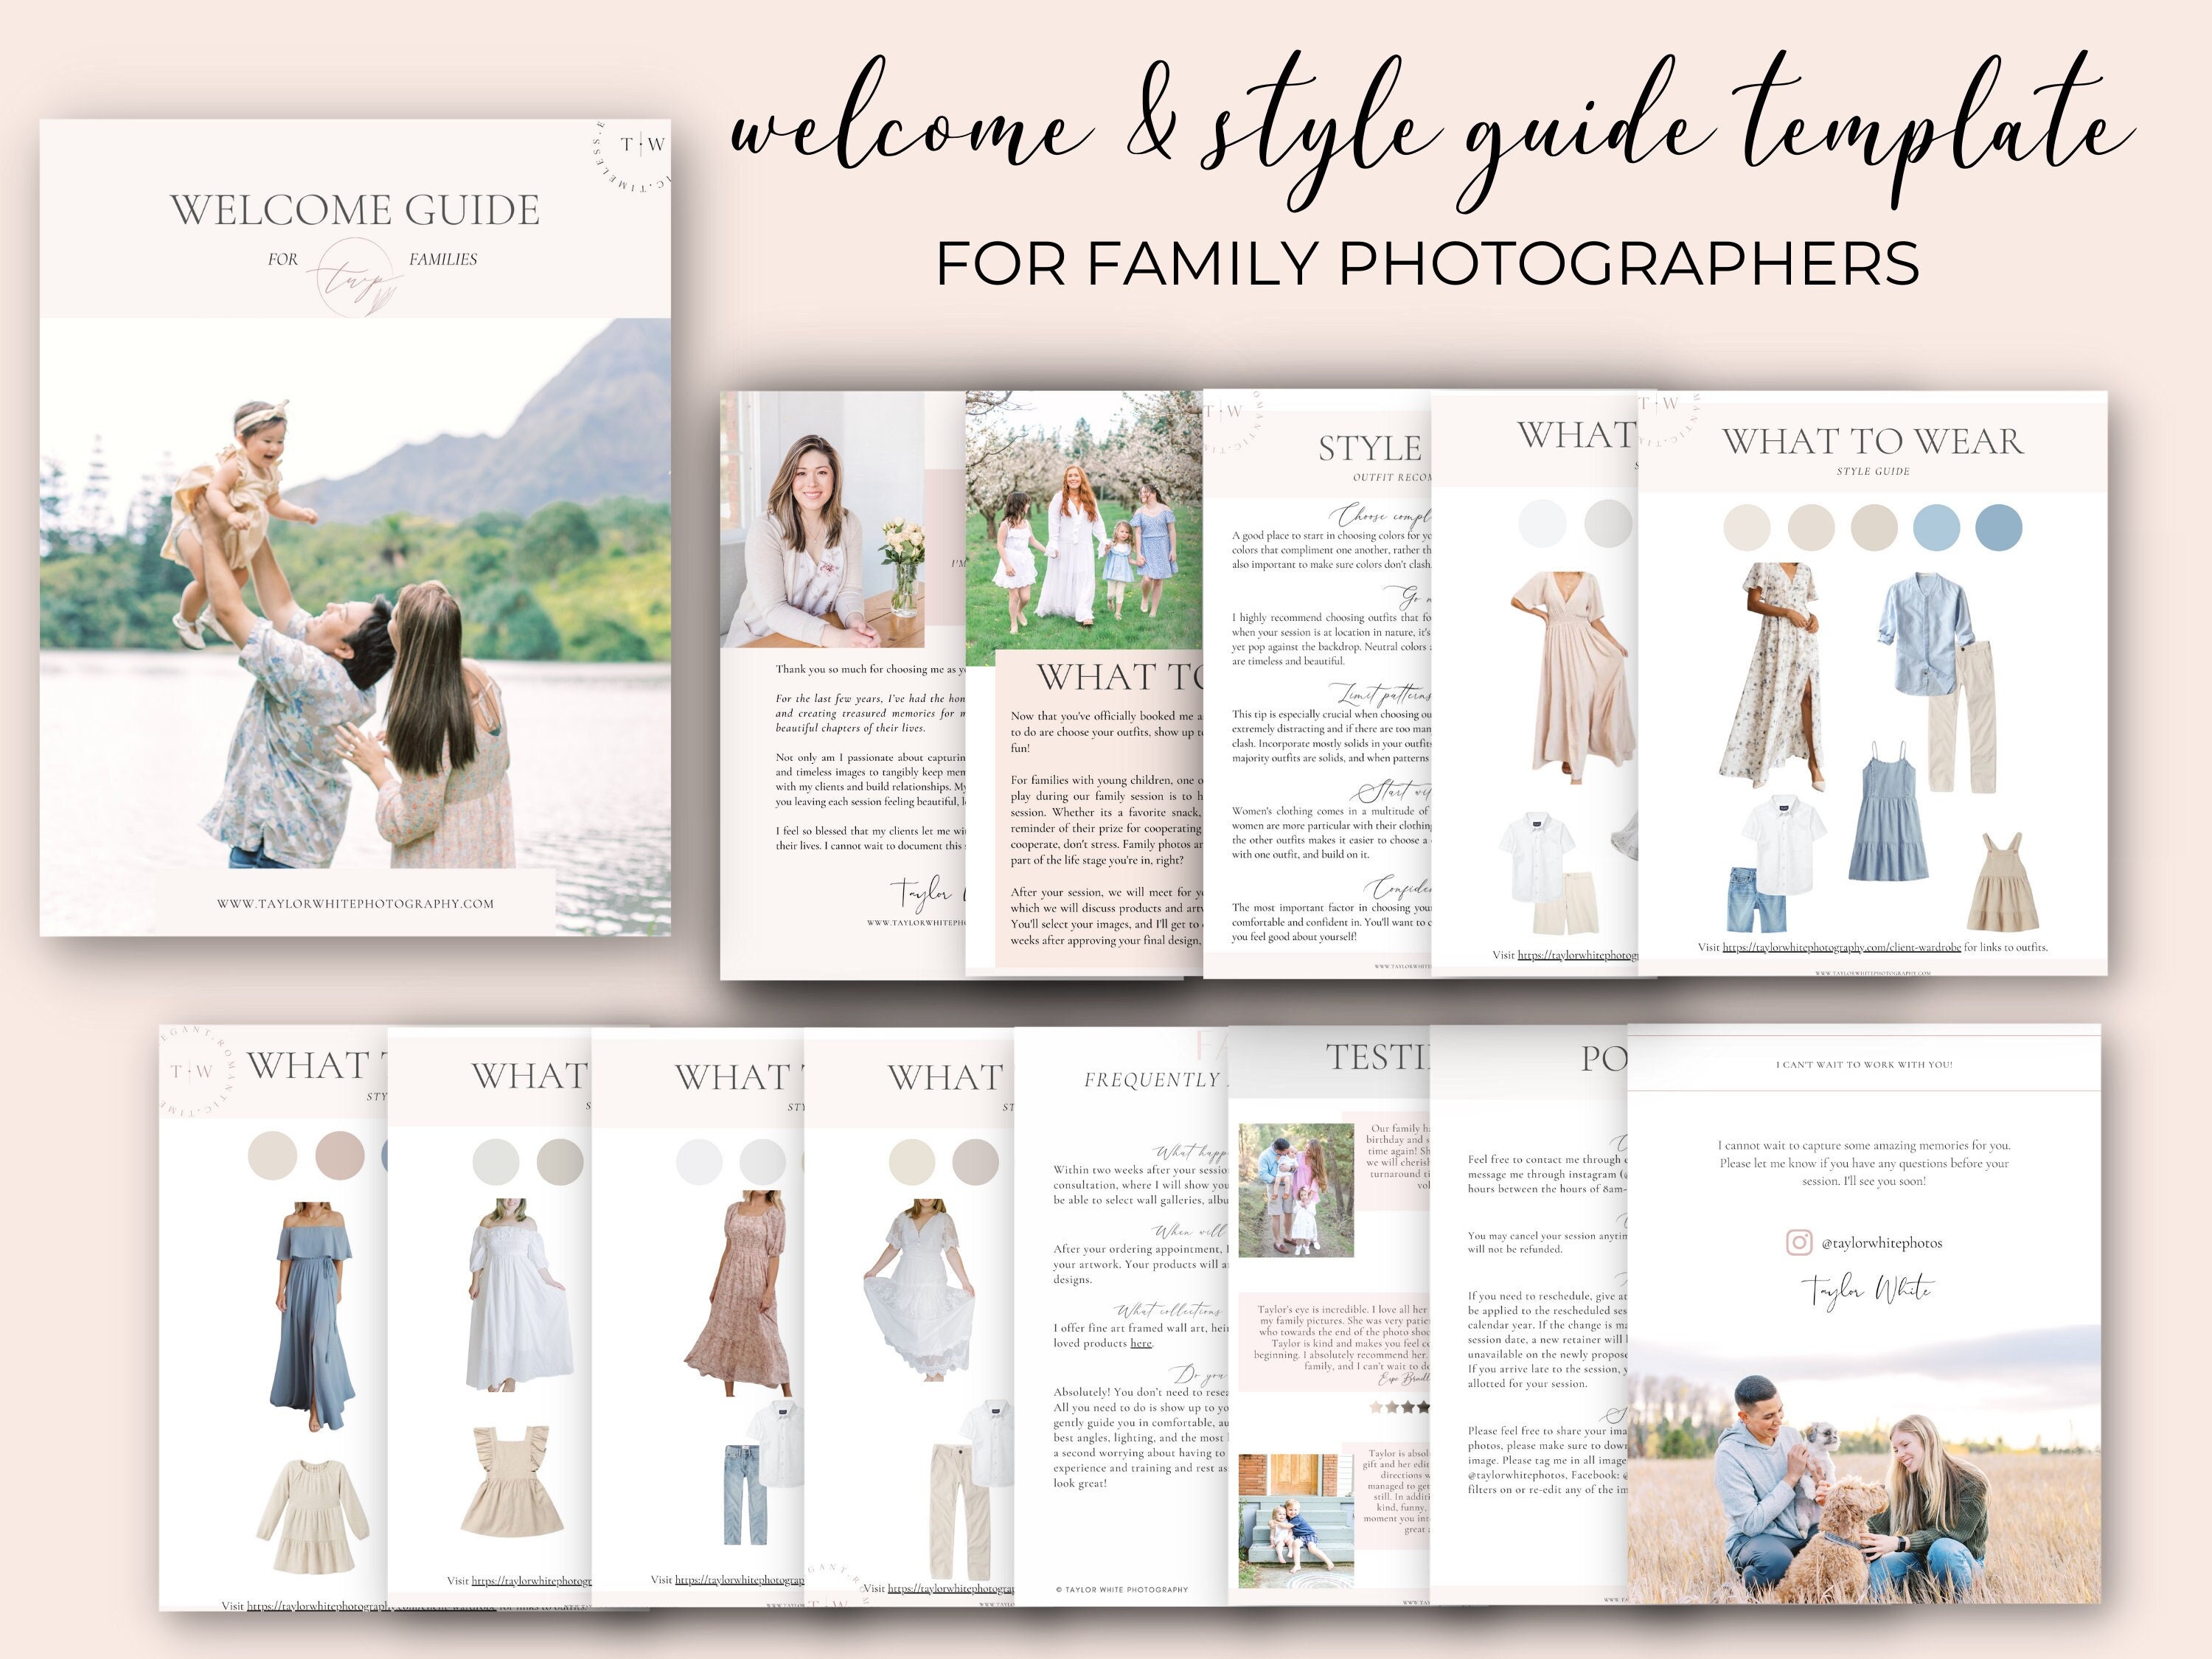 The Only Family Photography Guide You Need